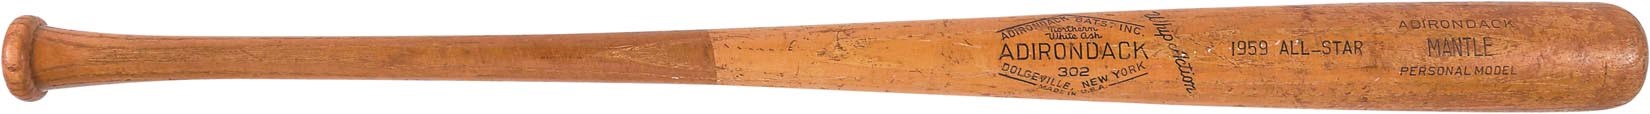 1959 Mickey Mantle All-Star Game Used Bat (PSA/DNA LOA)